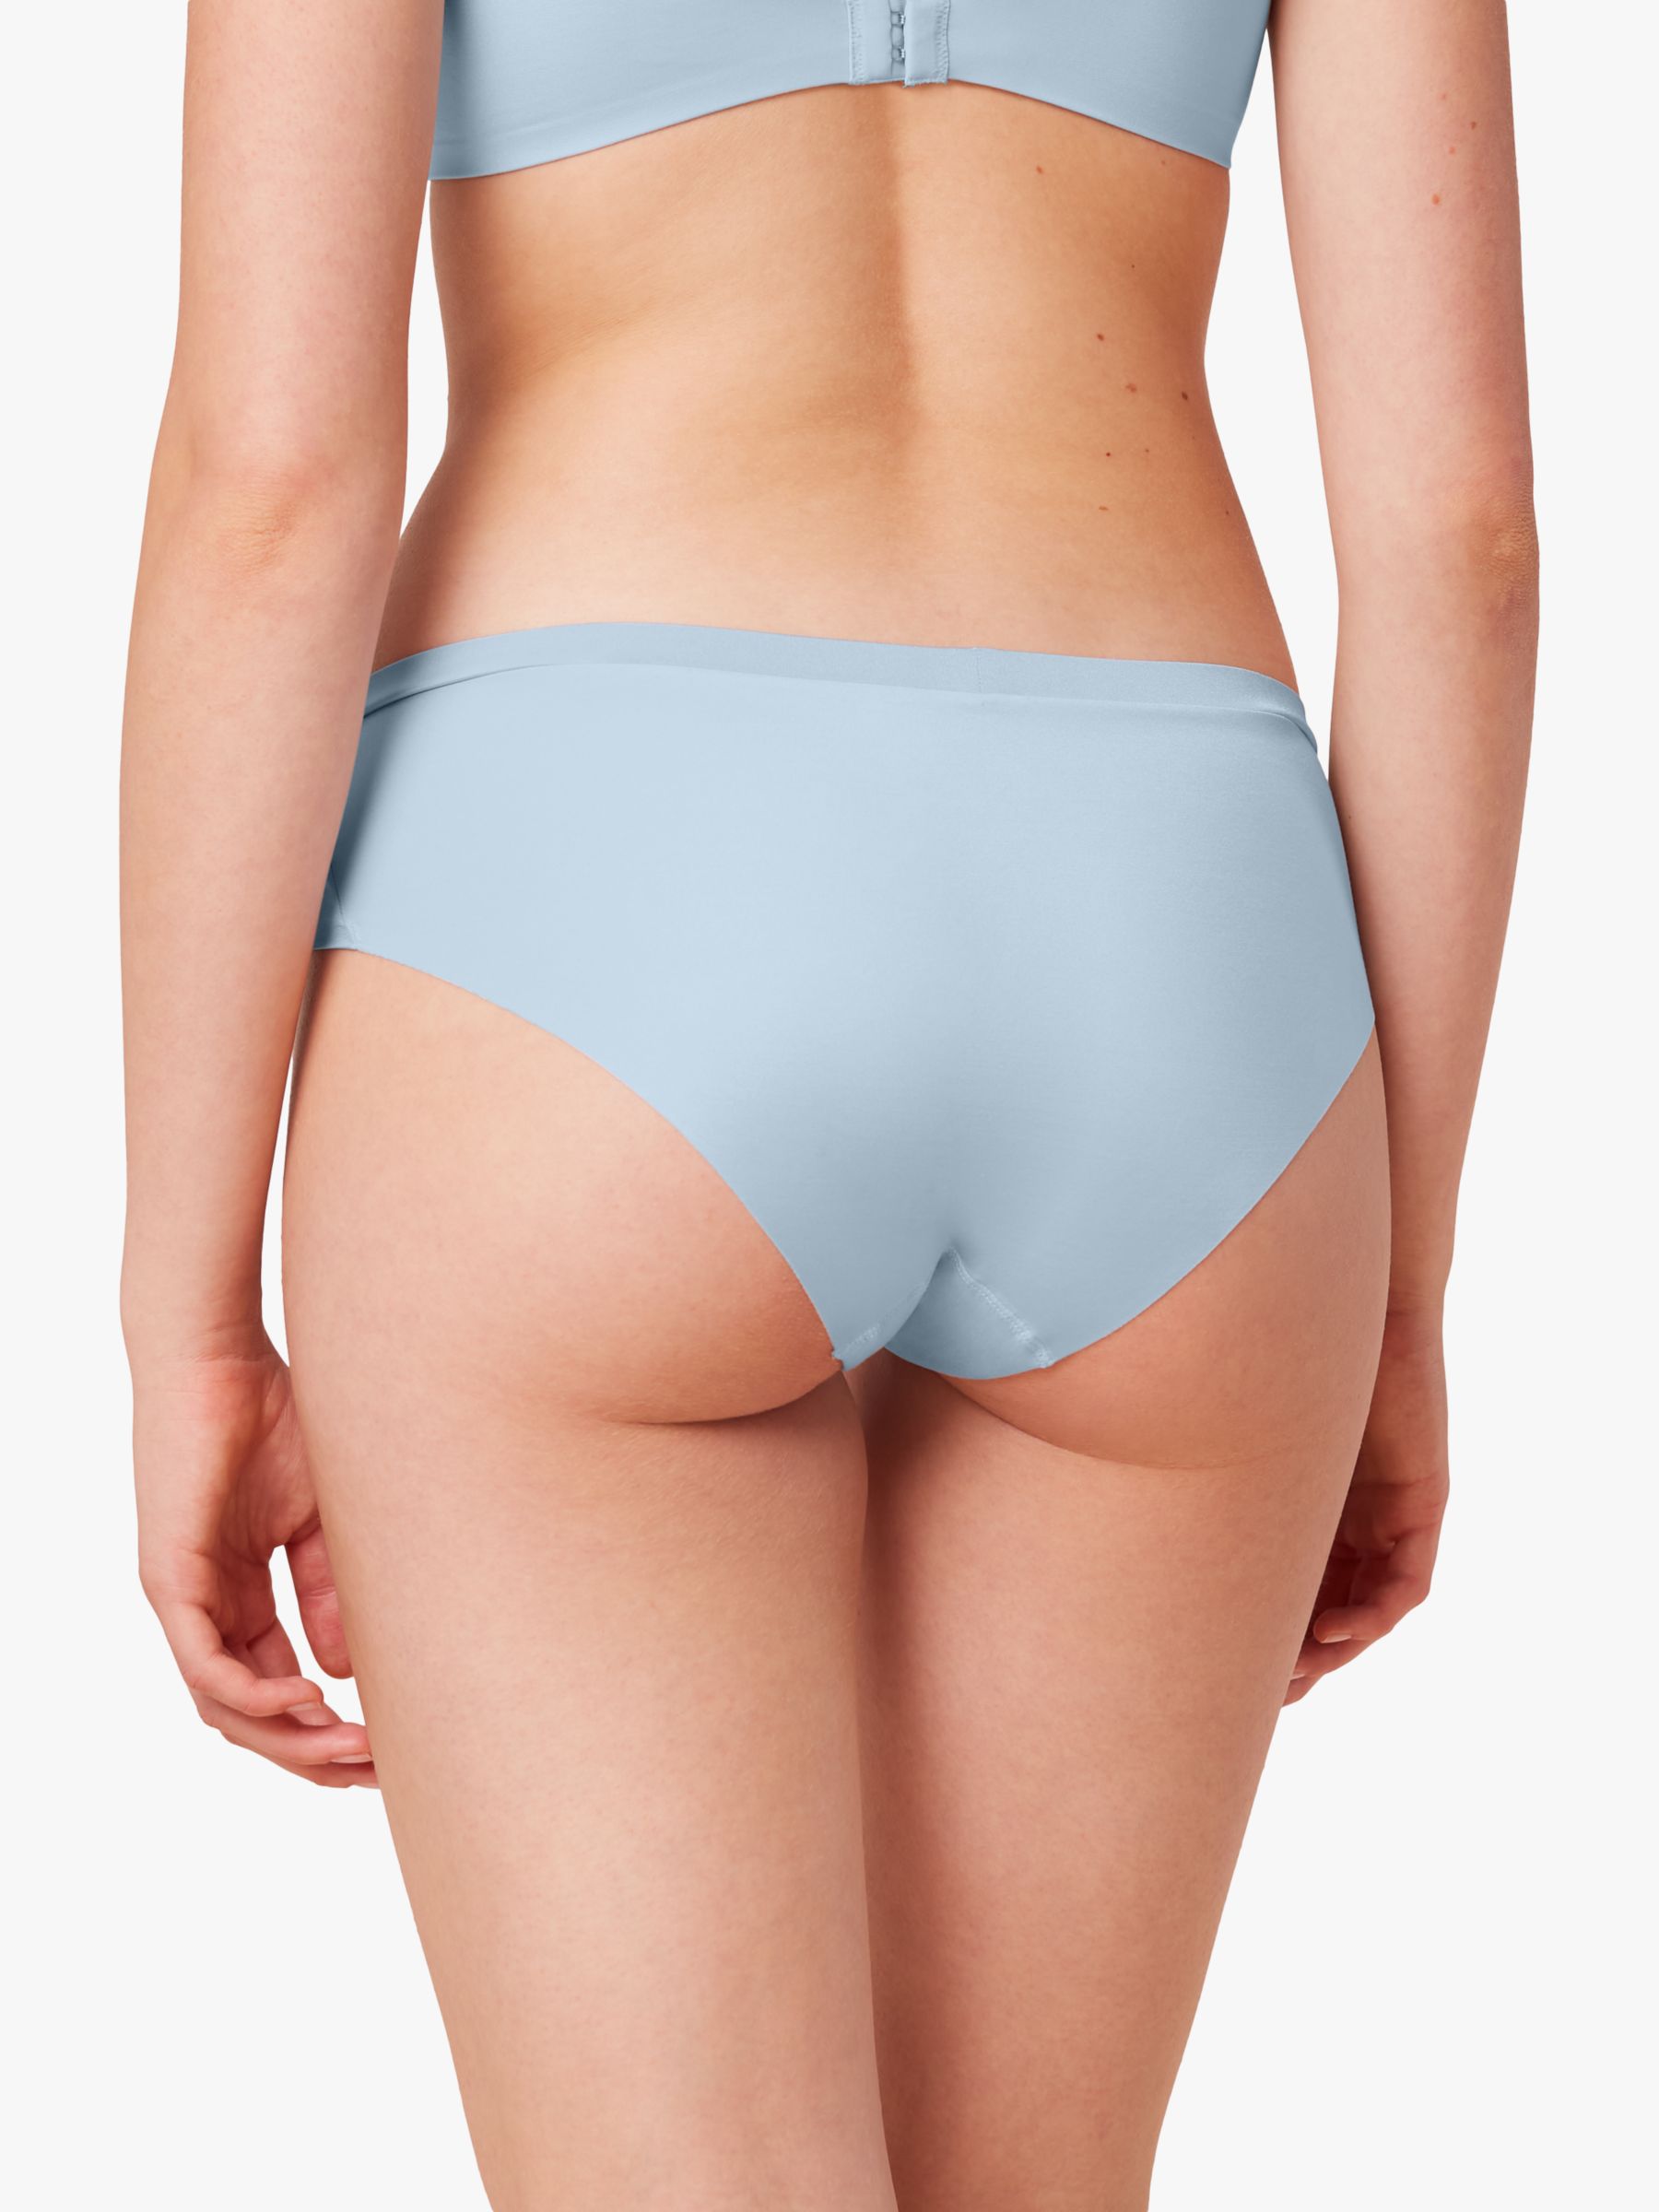 Buy Triumph Everyday Body Make-Up Soft Touch Hipster Briefs Online at johnlewis.com